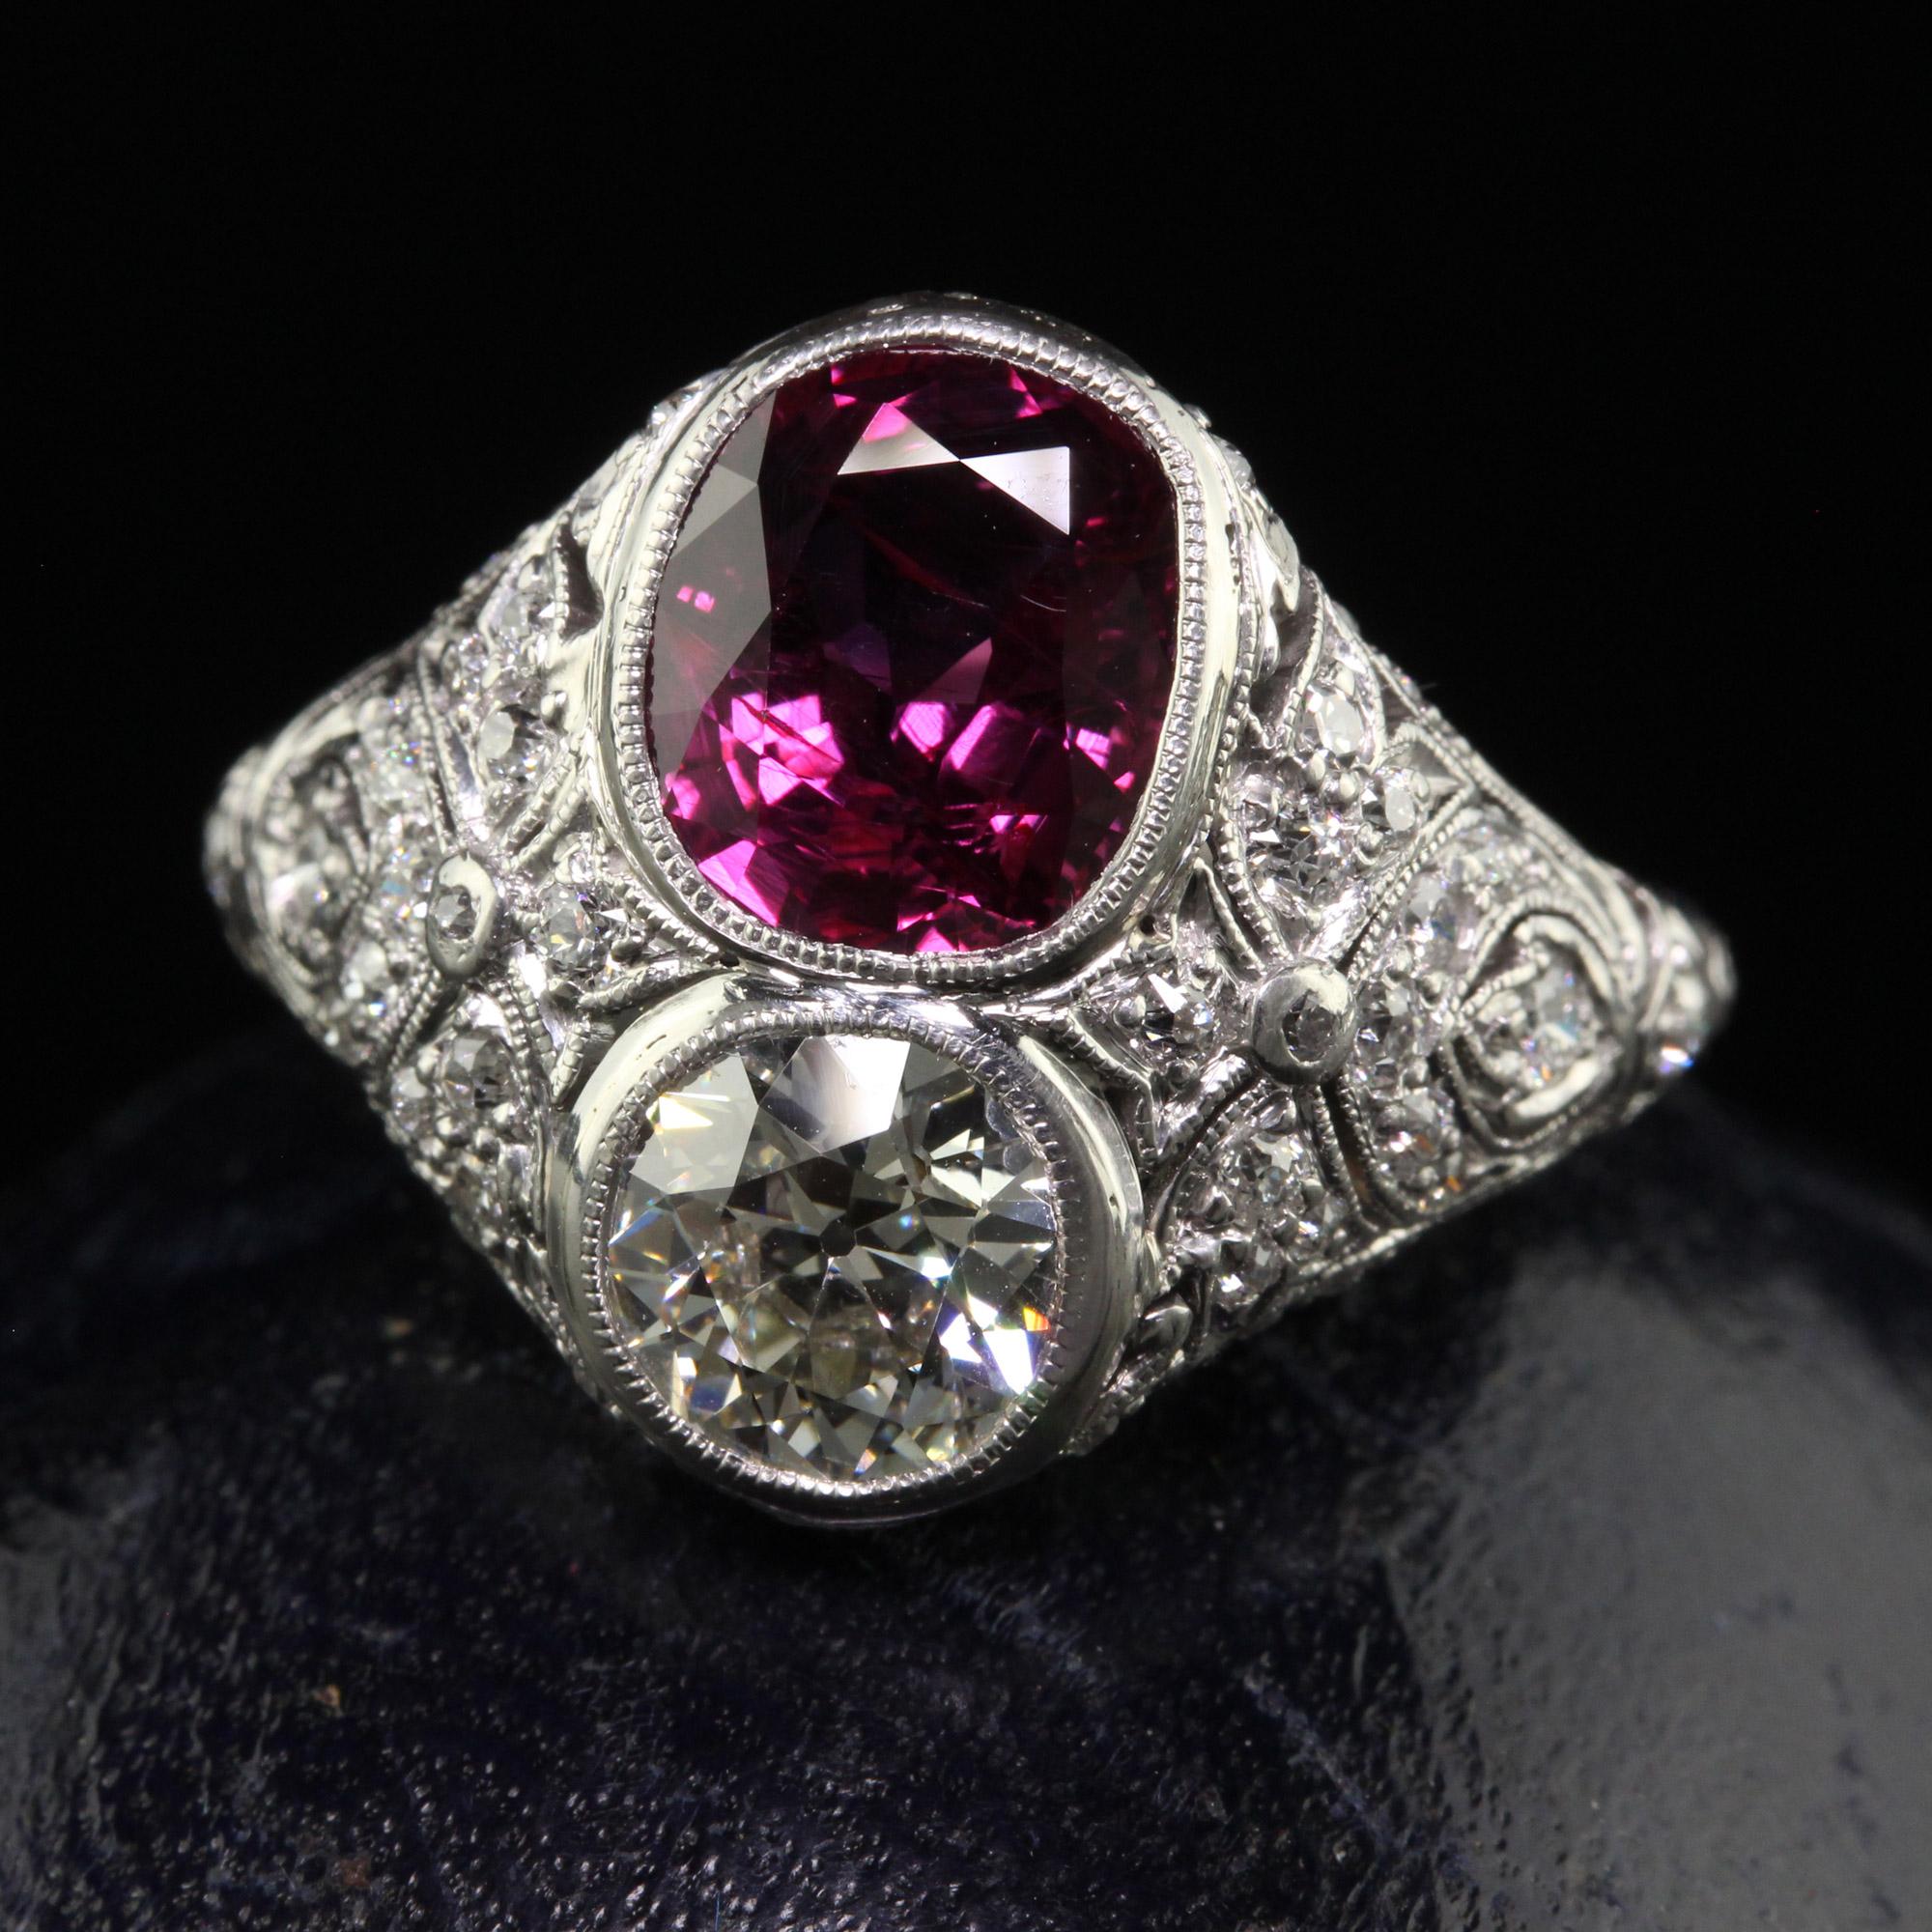 Beautiful Antique Edwardian Platinum Old Euro Diamond and No Heat Ruby Cocktail Ring - GIA. This gorgeous art deco cocktail ring is crafted in platinum. The ring holds a gorgeous natural ruby and diamond that both have GIA reports. There are old cut